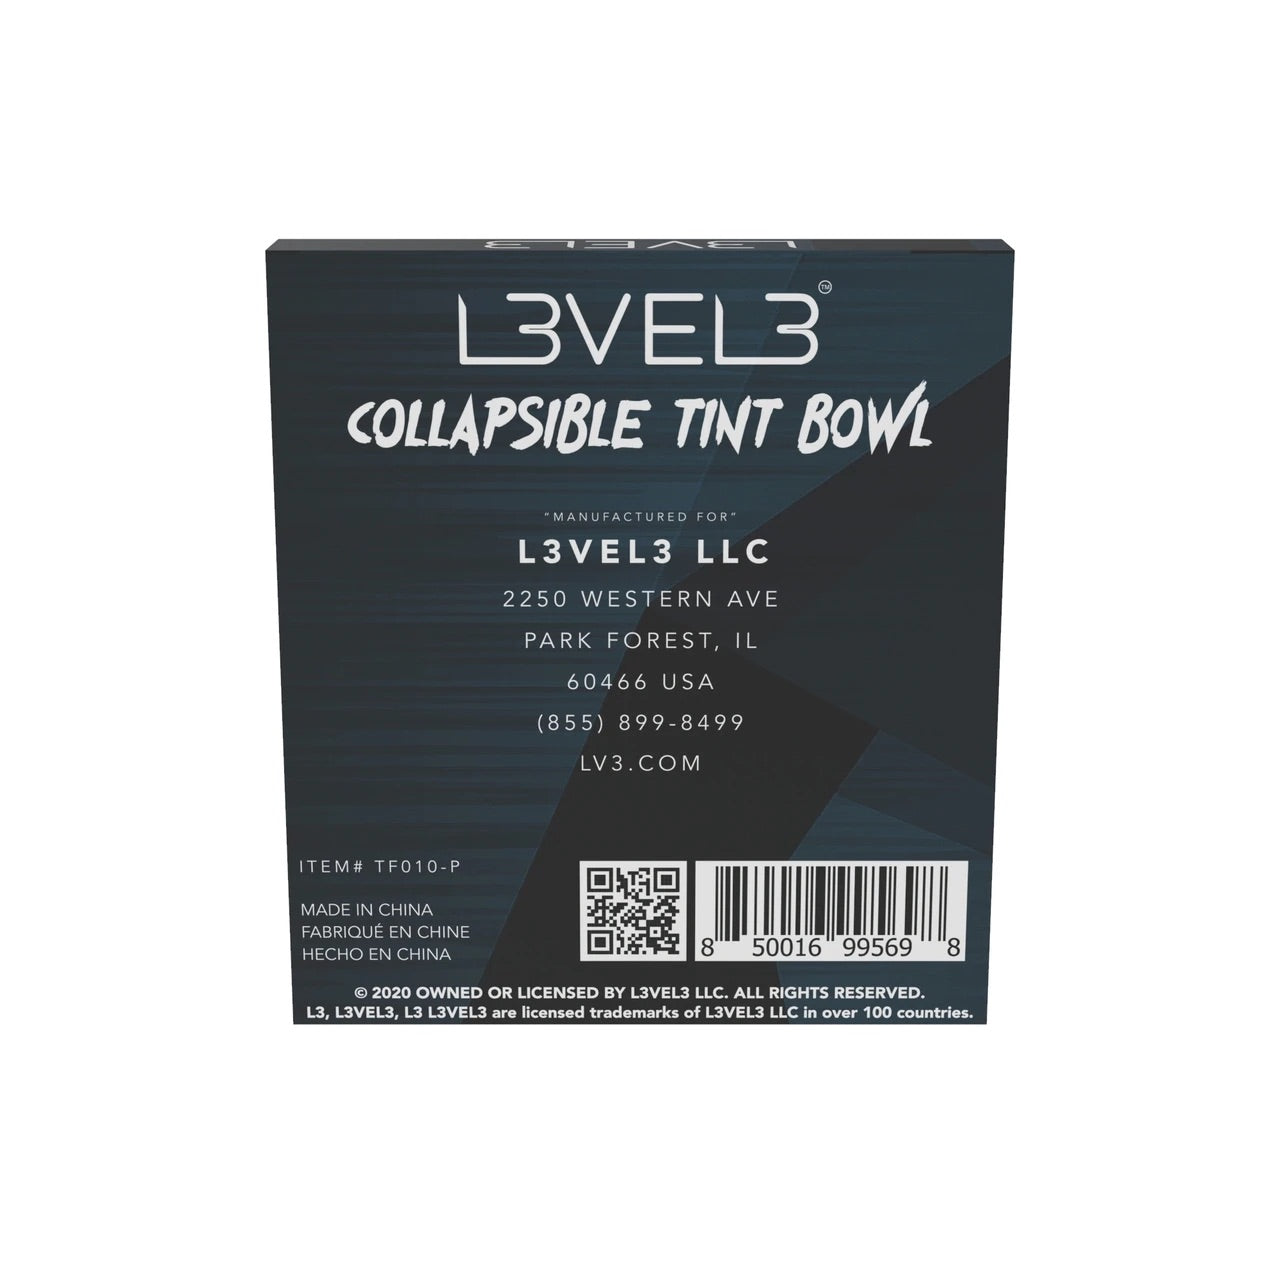 L3VEL3 Collapsible Tint Bowl - Pink